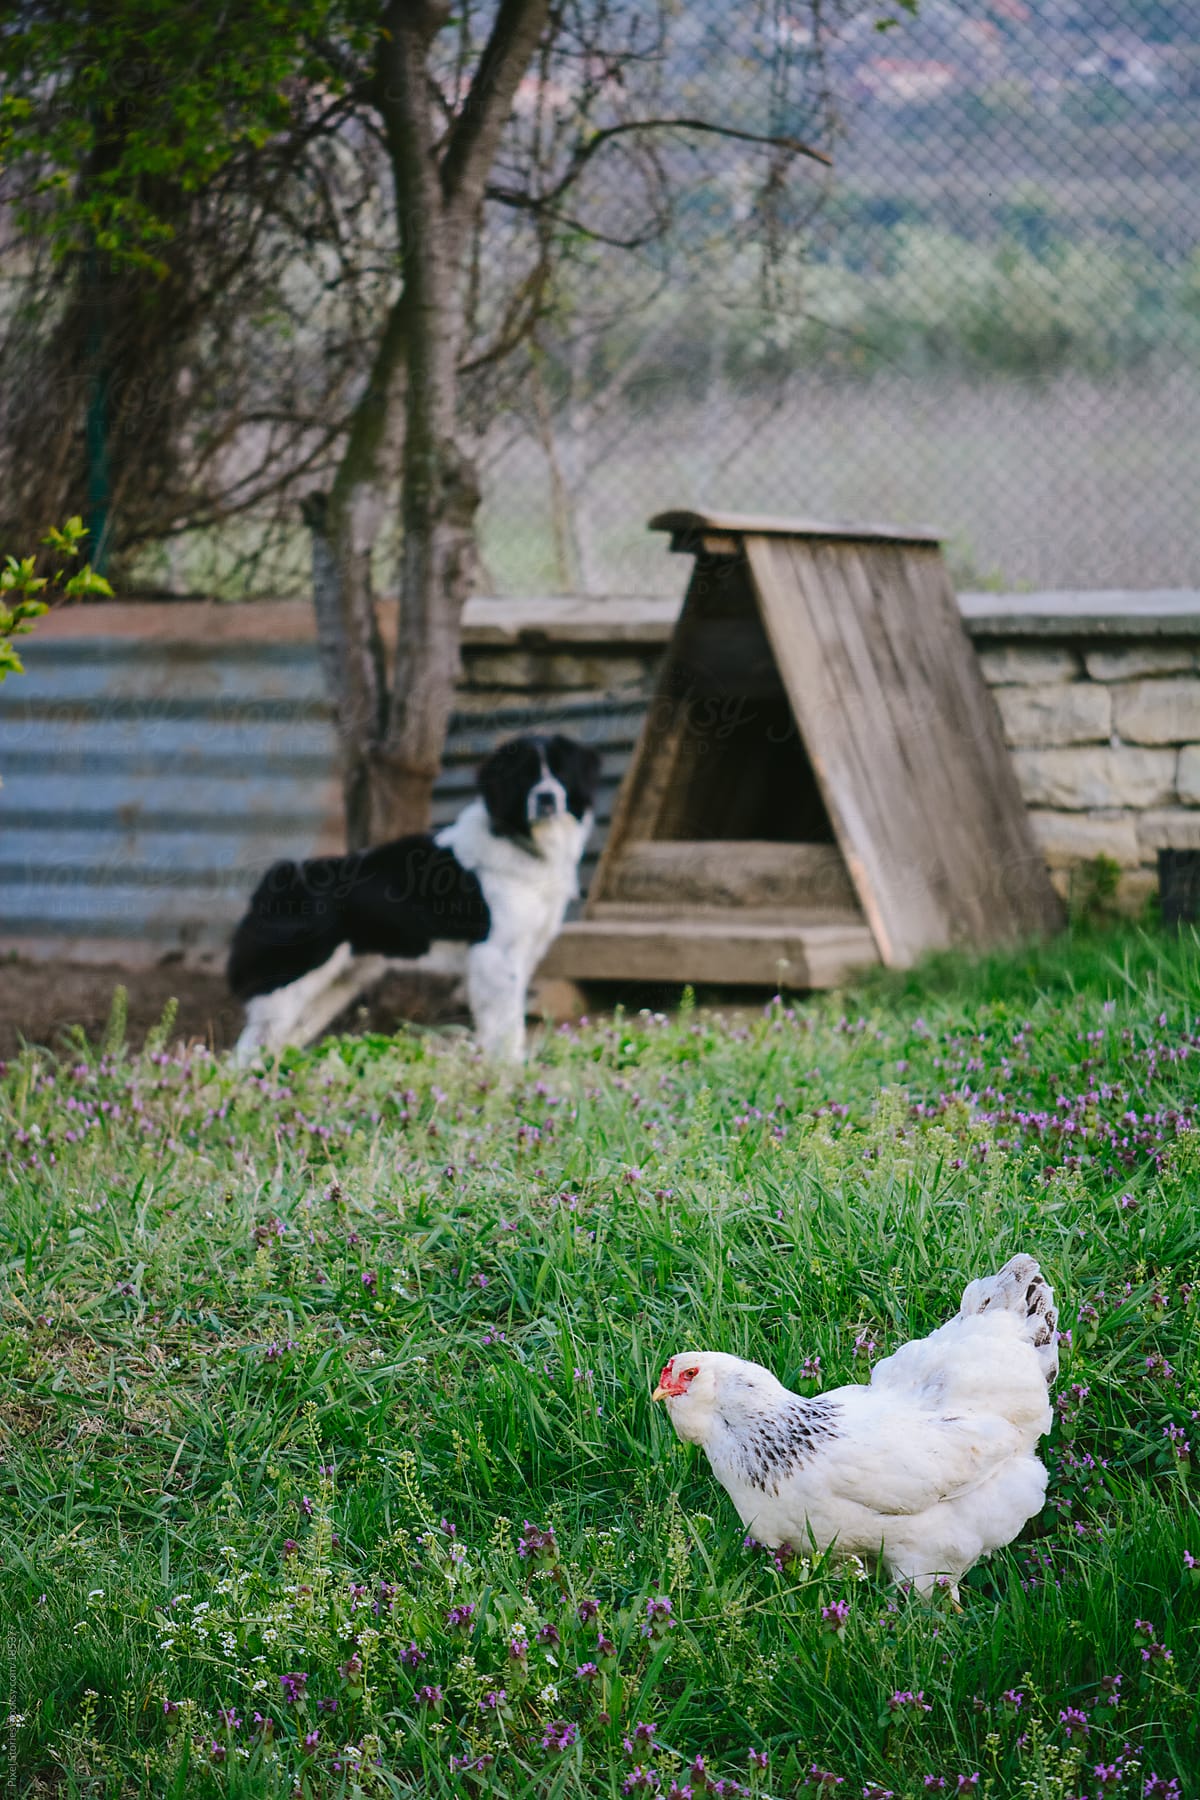 Dog looking at chicken